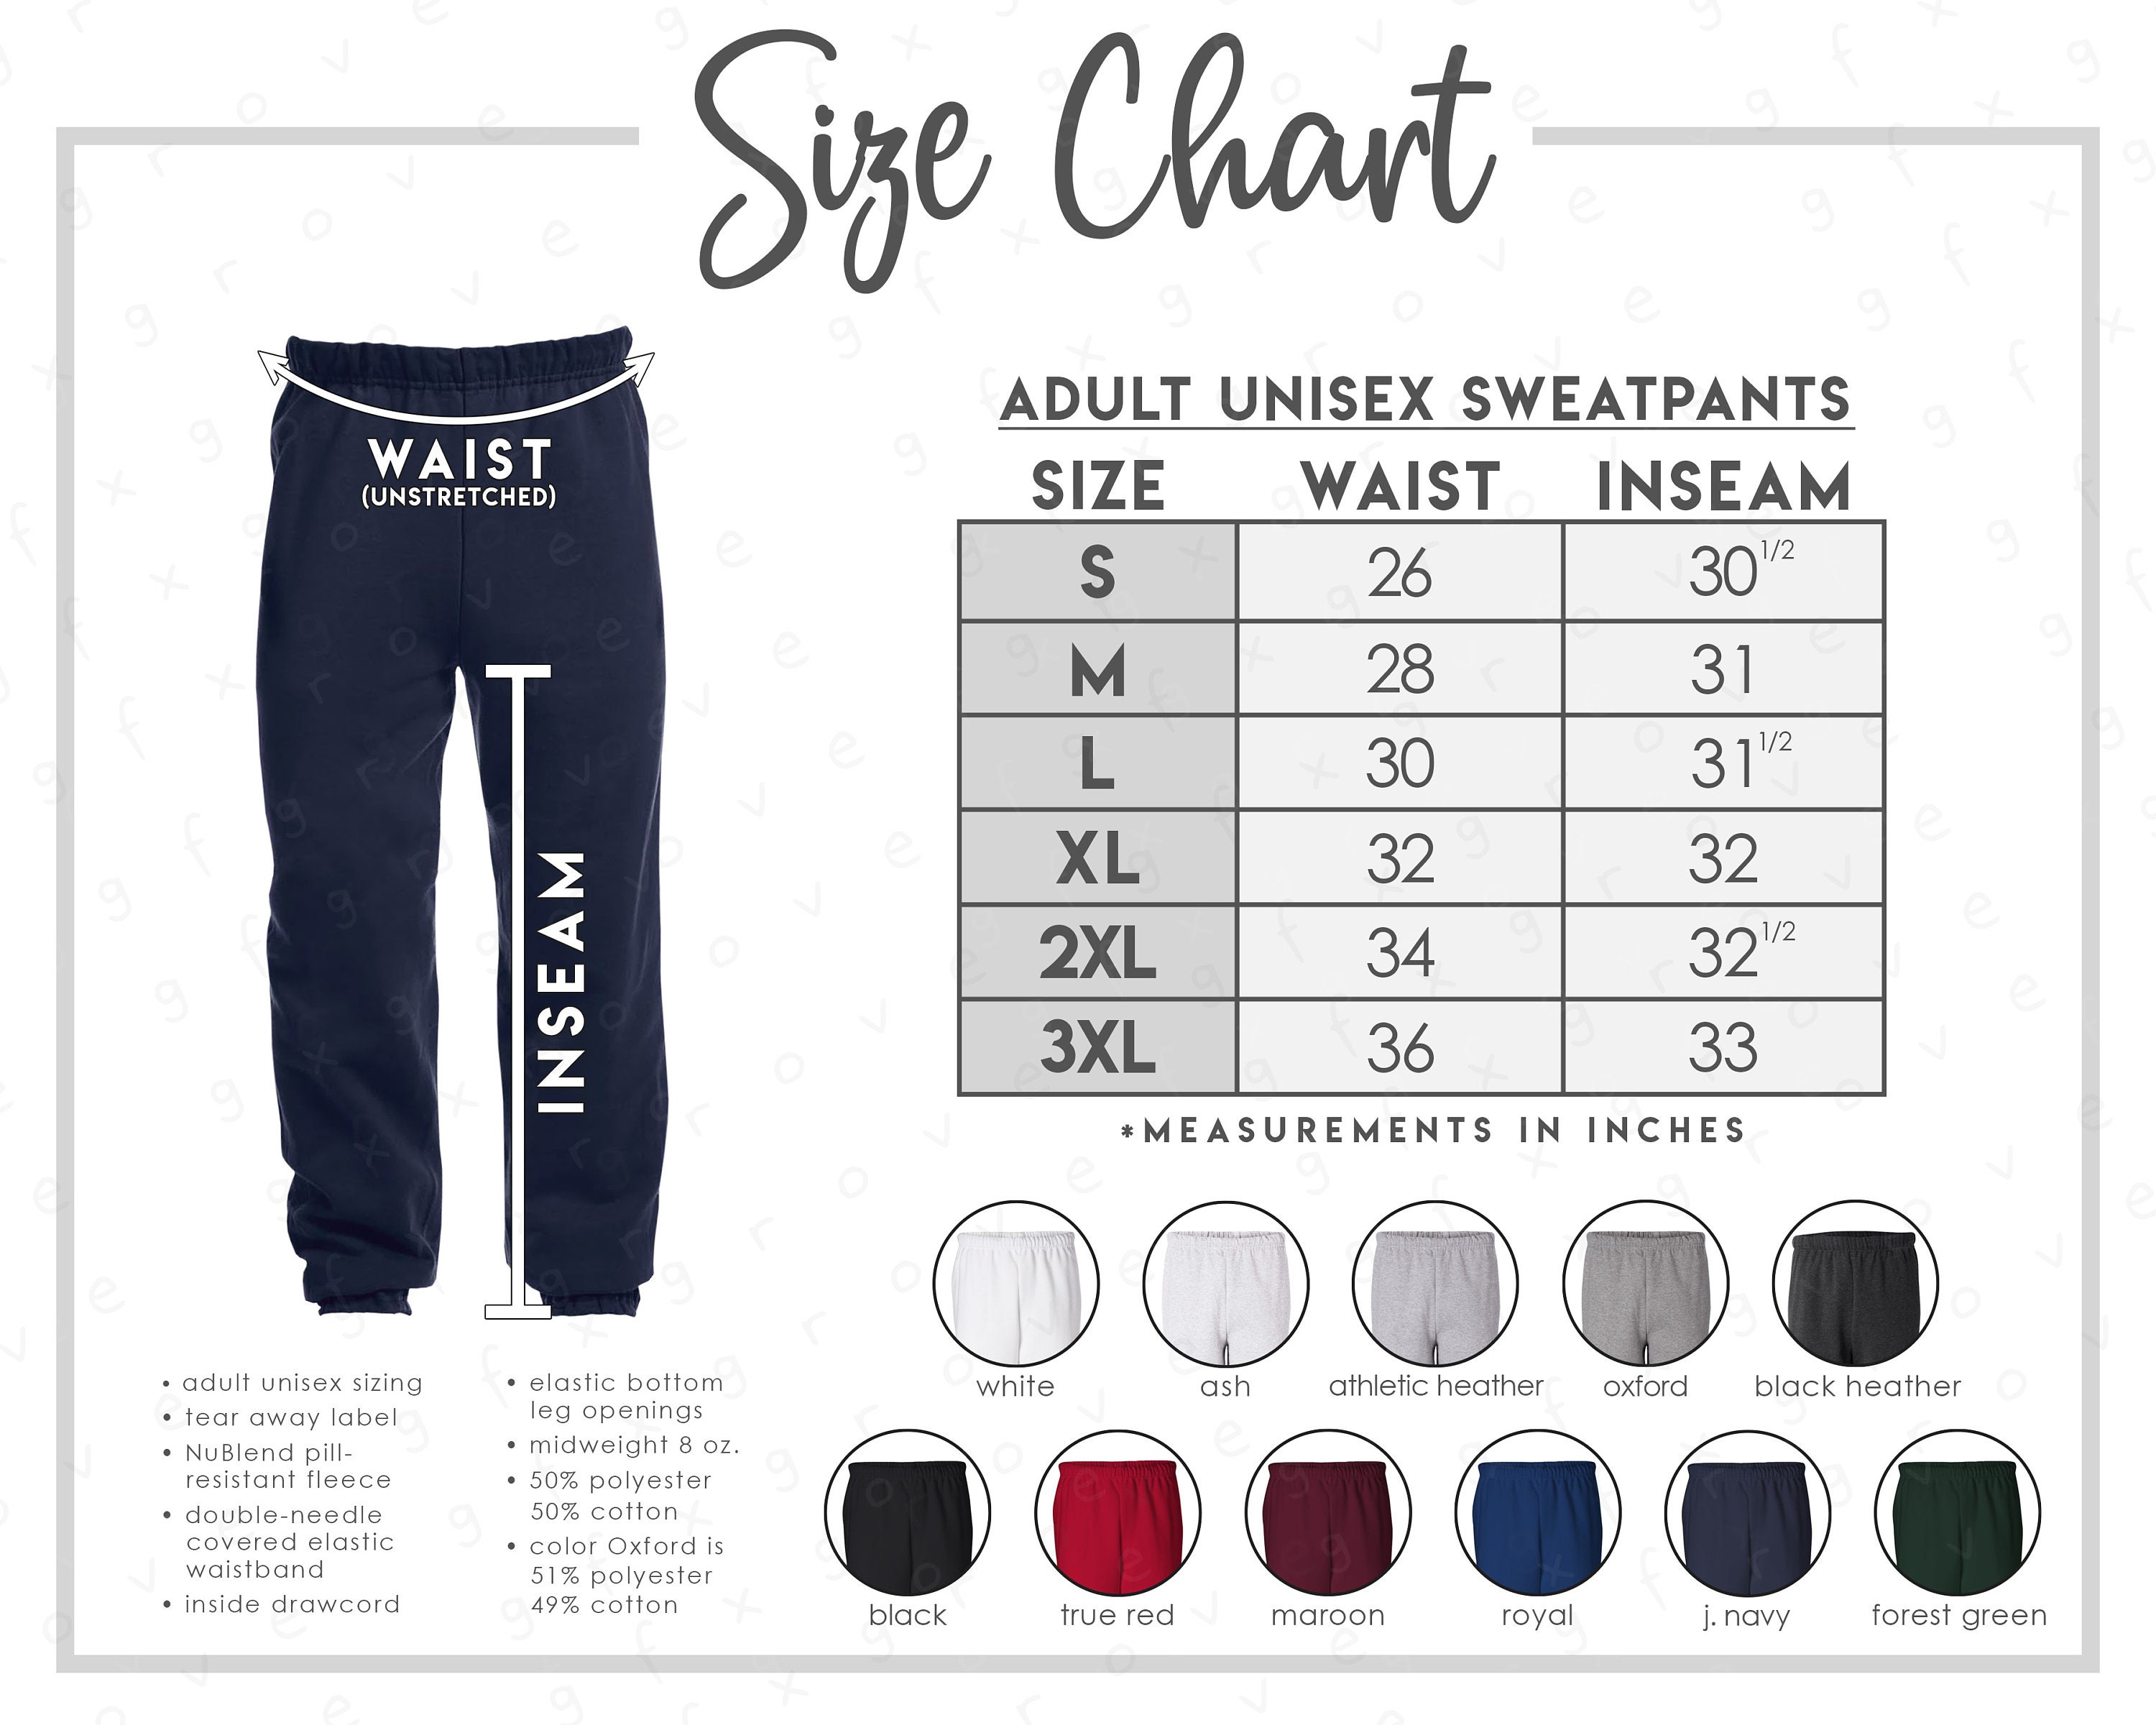 Jerzees 973MR Size Color Chart 2 Versions Included With & Without Branding  Jerzees Nublend Sweatpants Jerzees Sweatpants Jerzees 973 